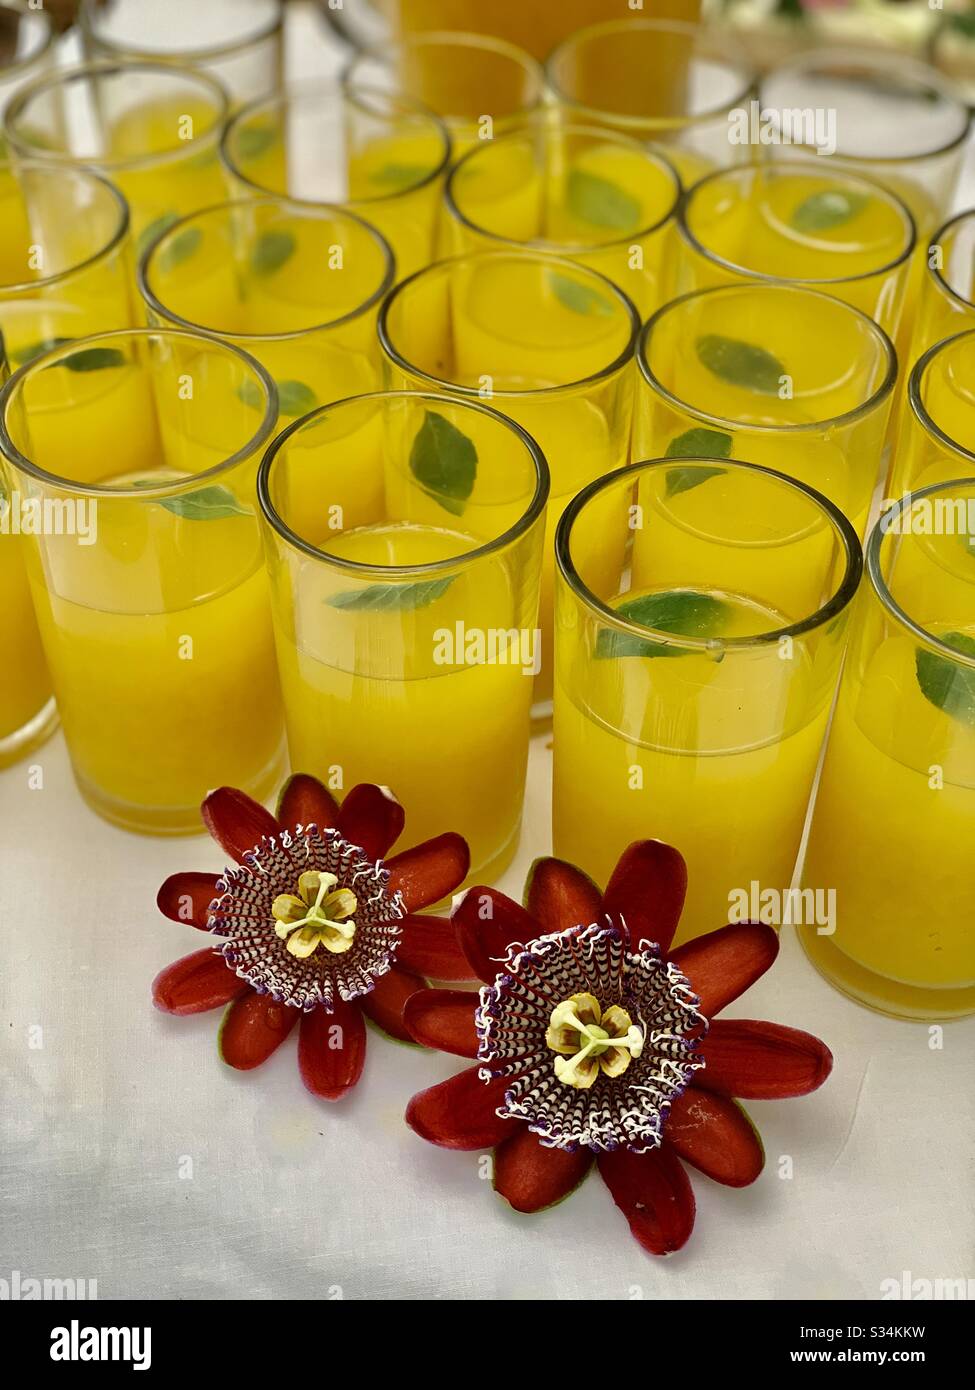 Refreshing passion fruit juice! Displayed are the enchanting Passion flowers. Squeezed from freshly-harvested passion fruit oozes a beautiful citrus flavor with a sweet note. Refreshed with mint. Stock Photo